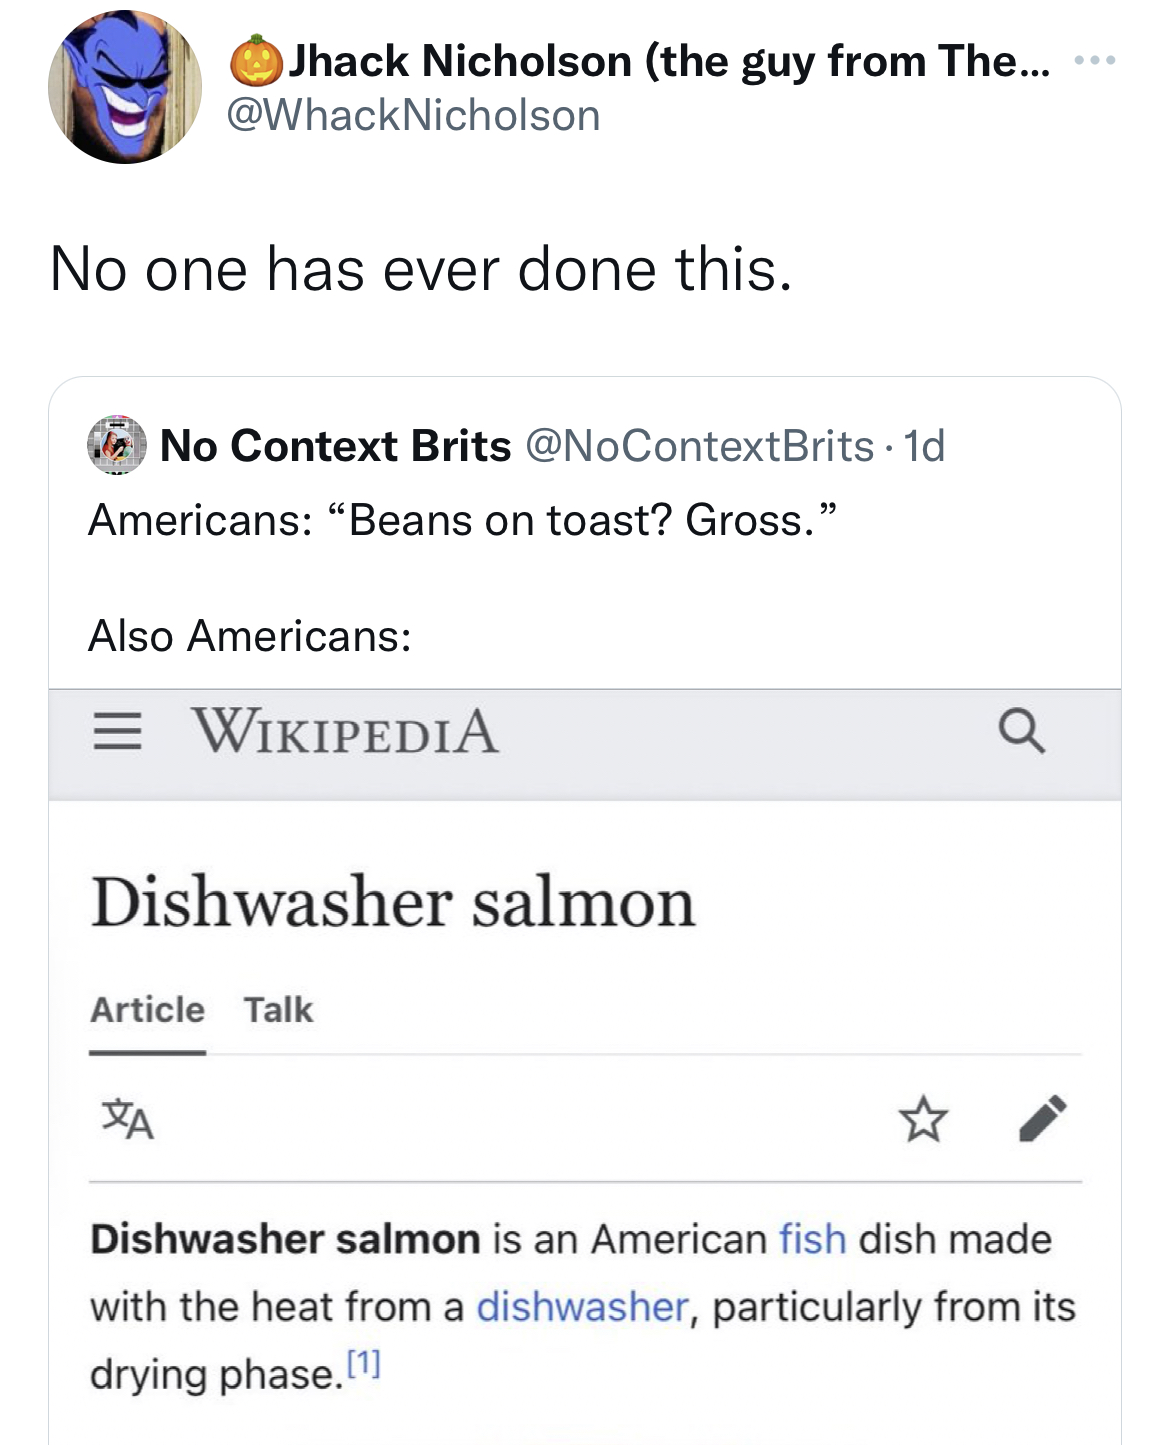 savage tweets to start the week - document - Jhack Nicholson the guy from The... No one has ever done this. No Context Brits . 1d Americans "Beans on toast? Gross." Also Americans Wikipedia Dishwasher salmon Article Talk Q Dishwasher salmon is an American